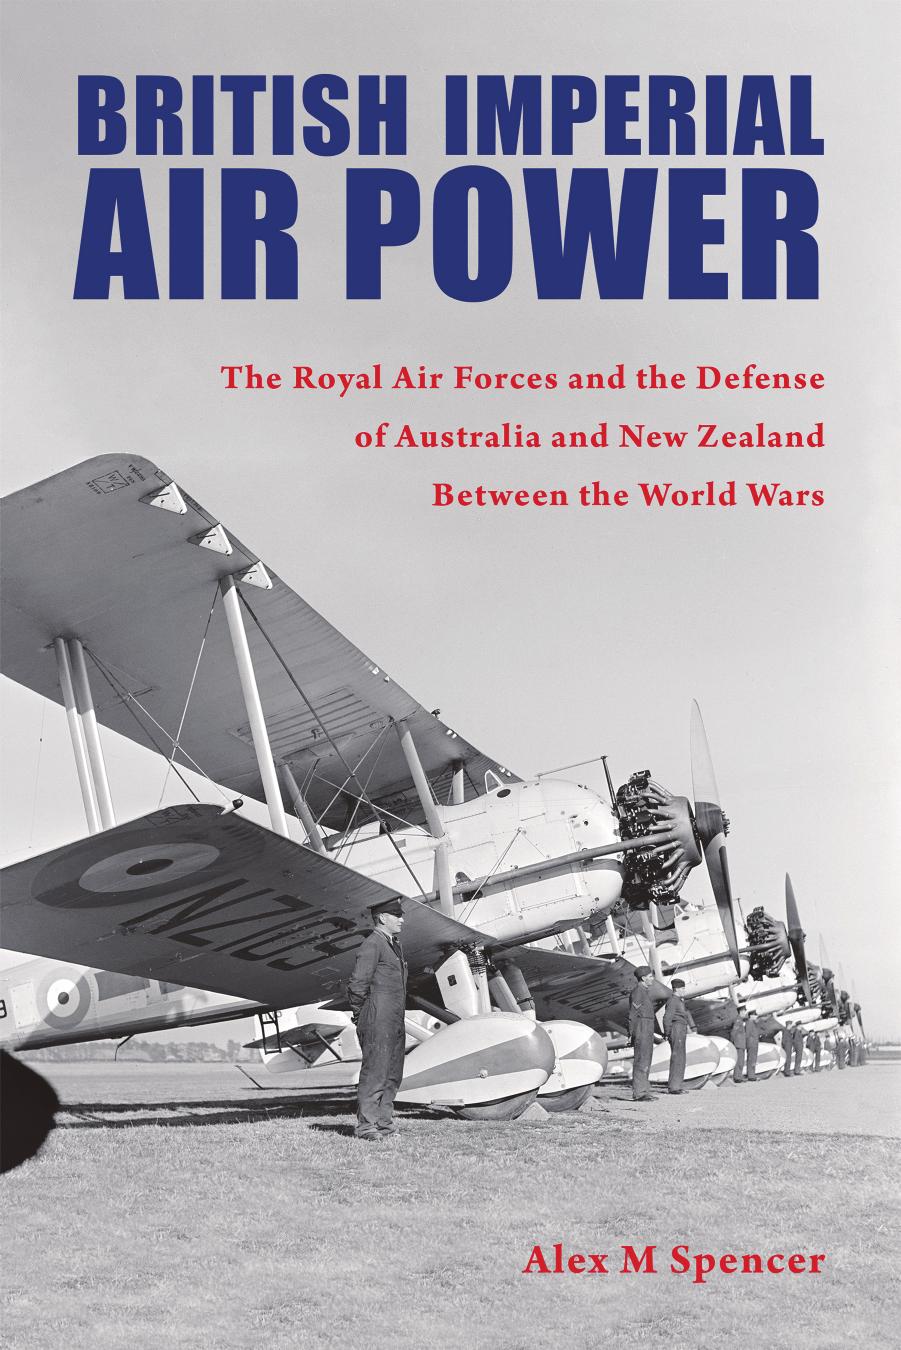 British Imperial Air Power: The Royal Air Forces and the Defense of Australia and New Zealand Between the World Wars by Alex M Spencer